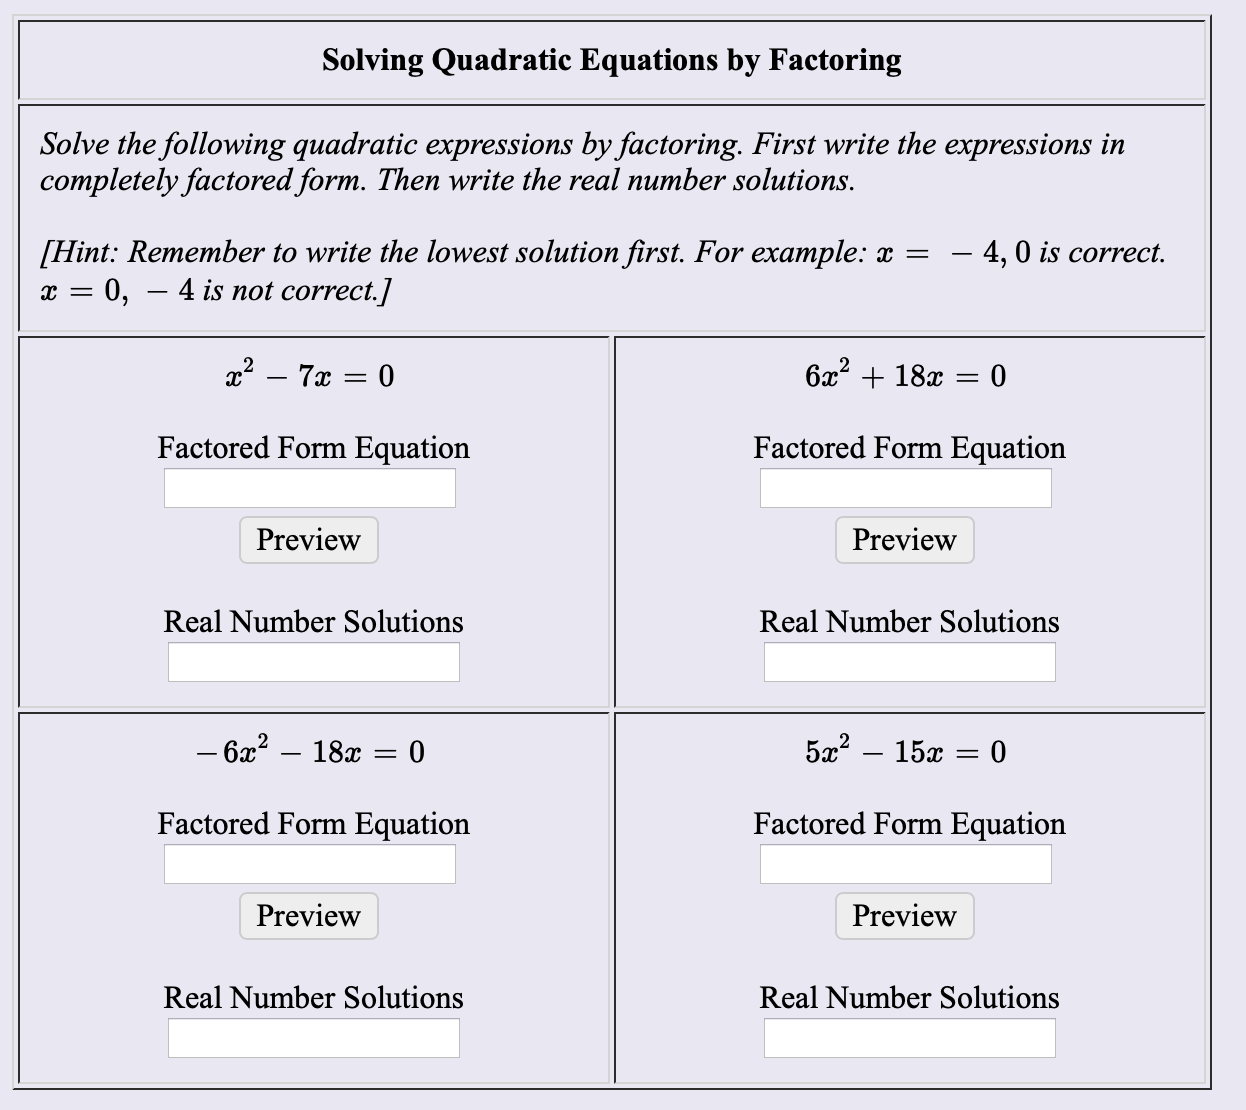 Solving Quadratic Equations by Factoring
Solve the following quadratic expressions by factoring. First write the expressions in
completely factored form. Then write the real number solutions
Hint: Remember to write the lowest solution first. For example: x
0,
- 4,0 is correct
4 is not correct.]
x27 0
Factored Form Equation
Factored Form Equation
Preview
Preview
Real Number Solutions
Real Number Solutions
- 6x2 - 18x = 0
5a2-15a
0
11
Factored Form Equation
Factored Form Equation
Preview
Preview
Real Number Solutions
Real Number Solutions
